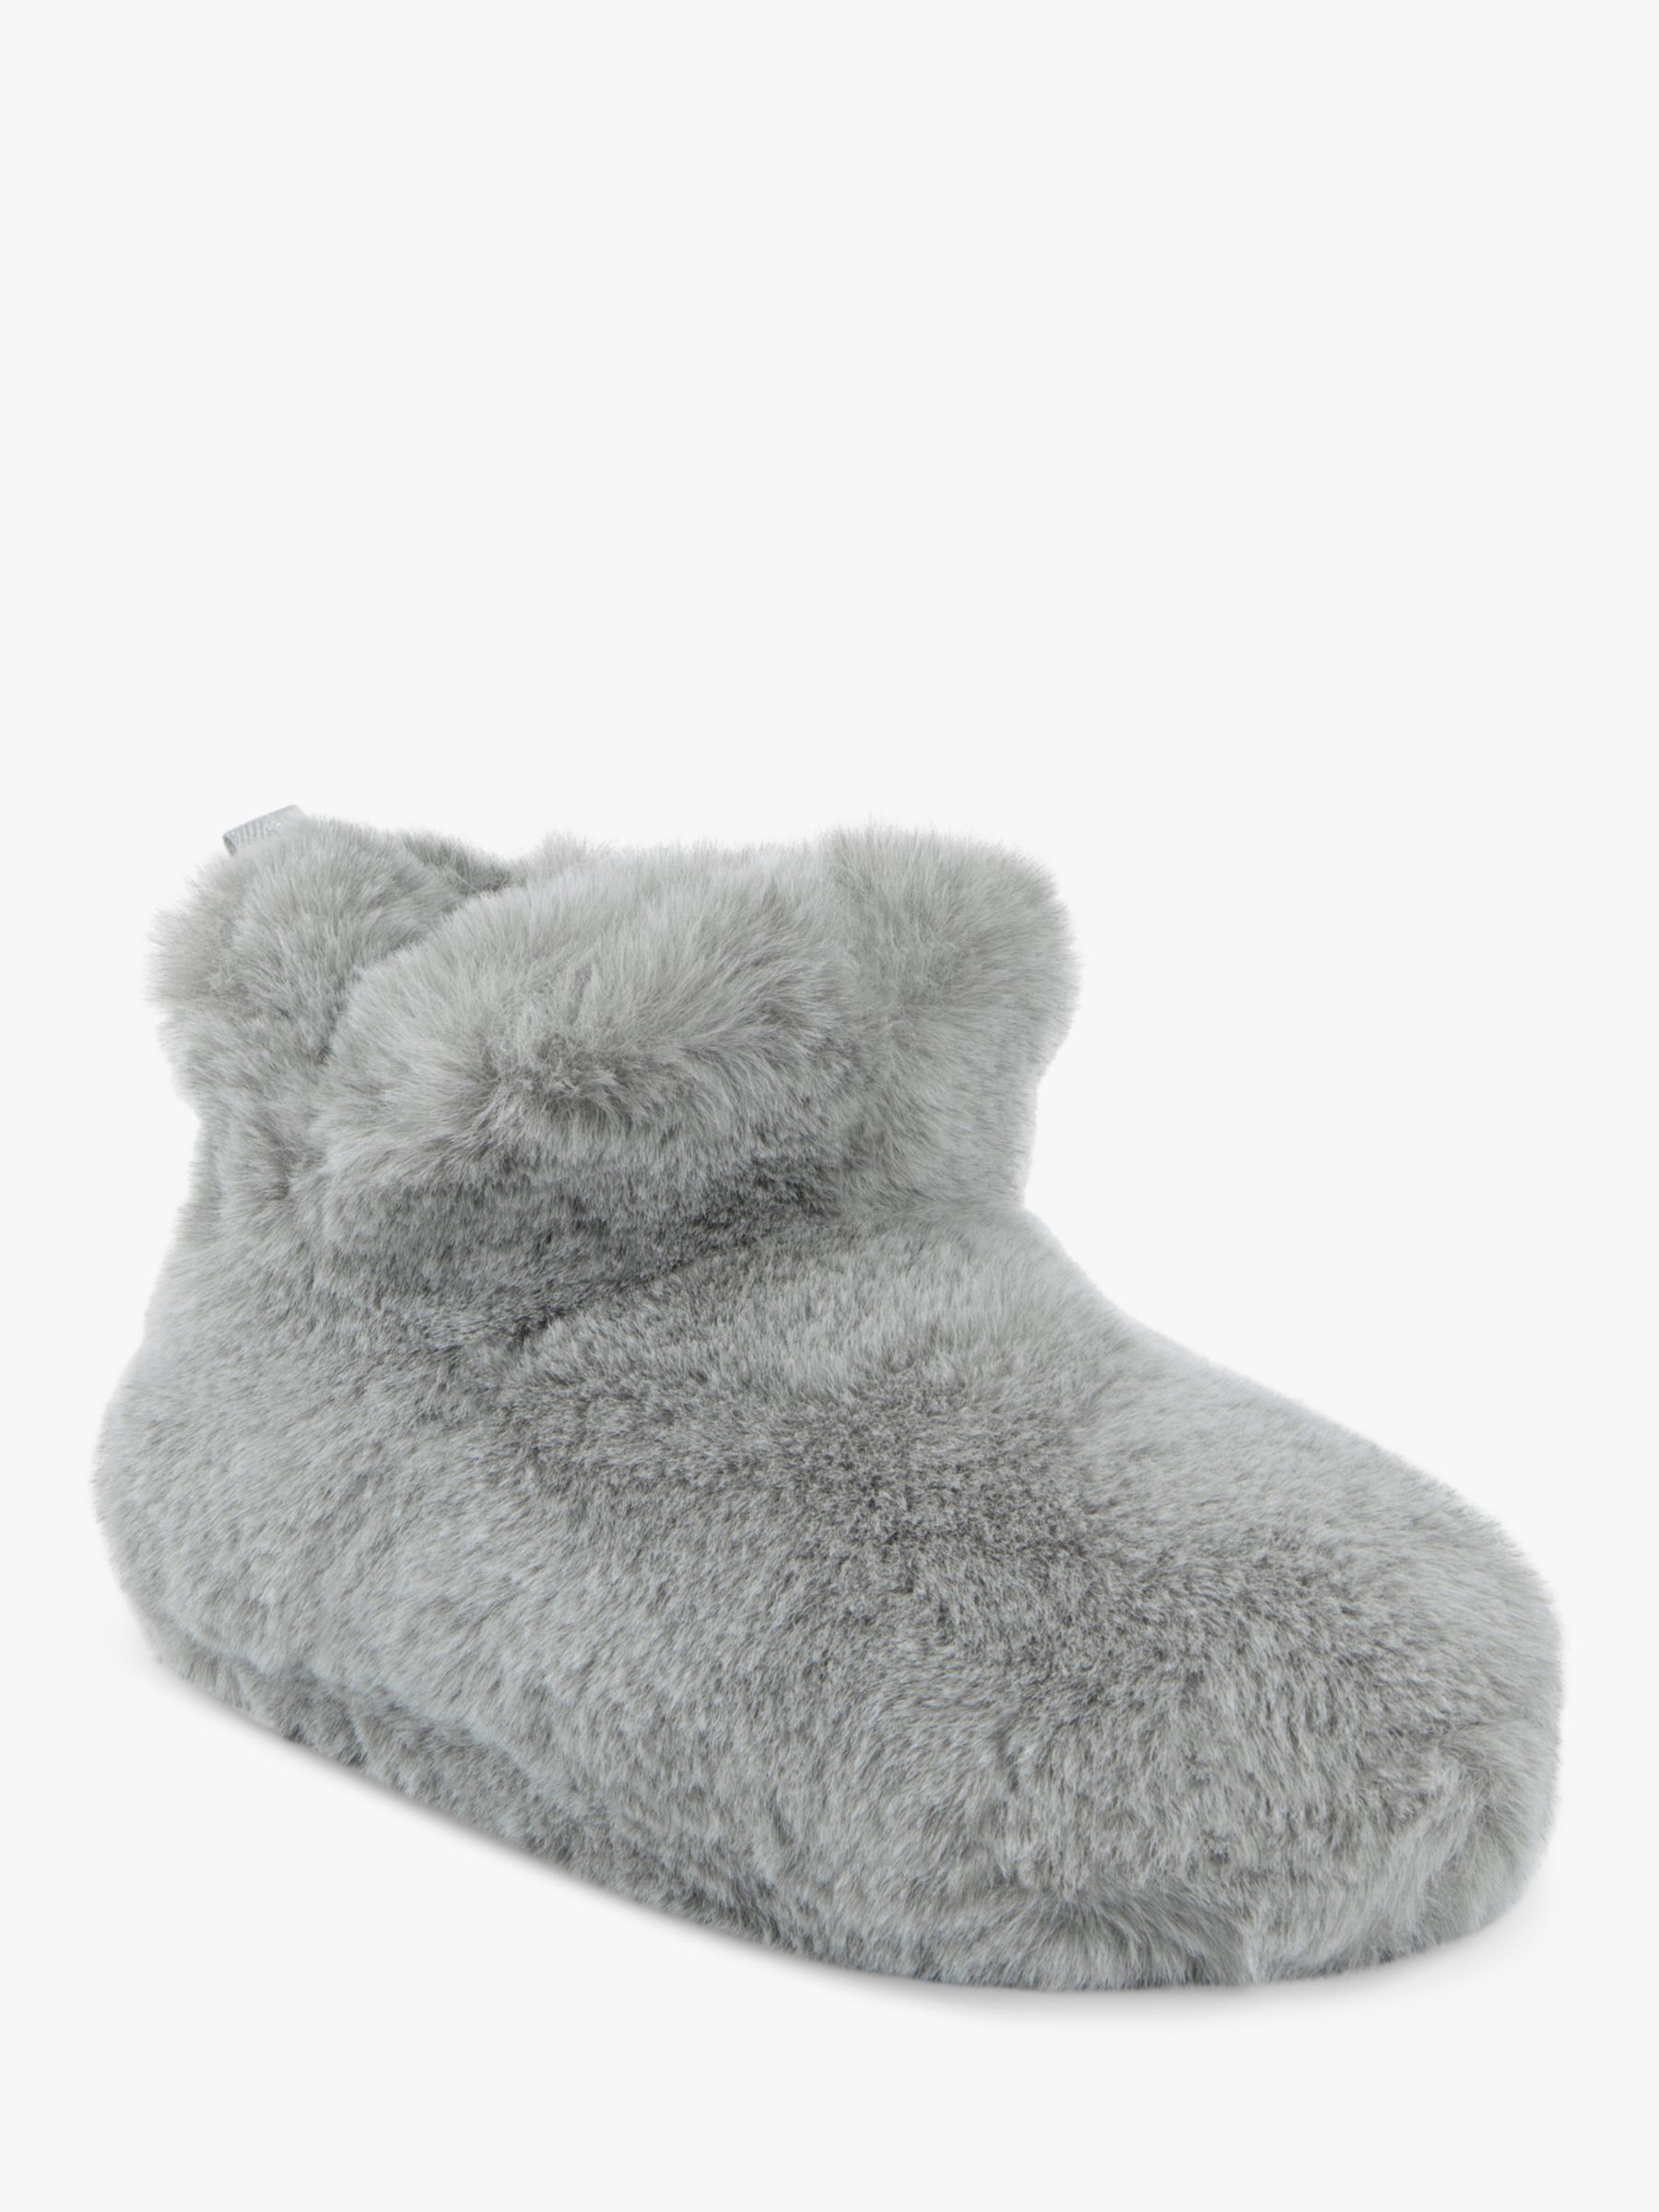 totes Faux Fur Bootie Style Slippers, Grey at John Lewis & Partners